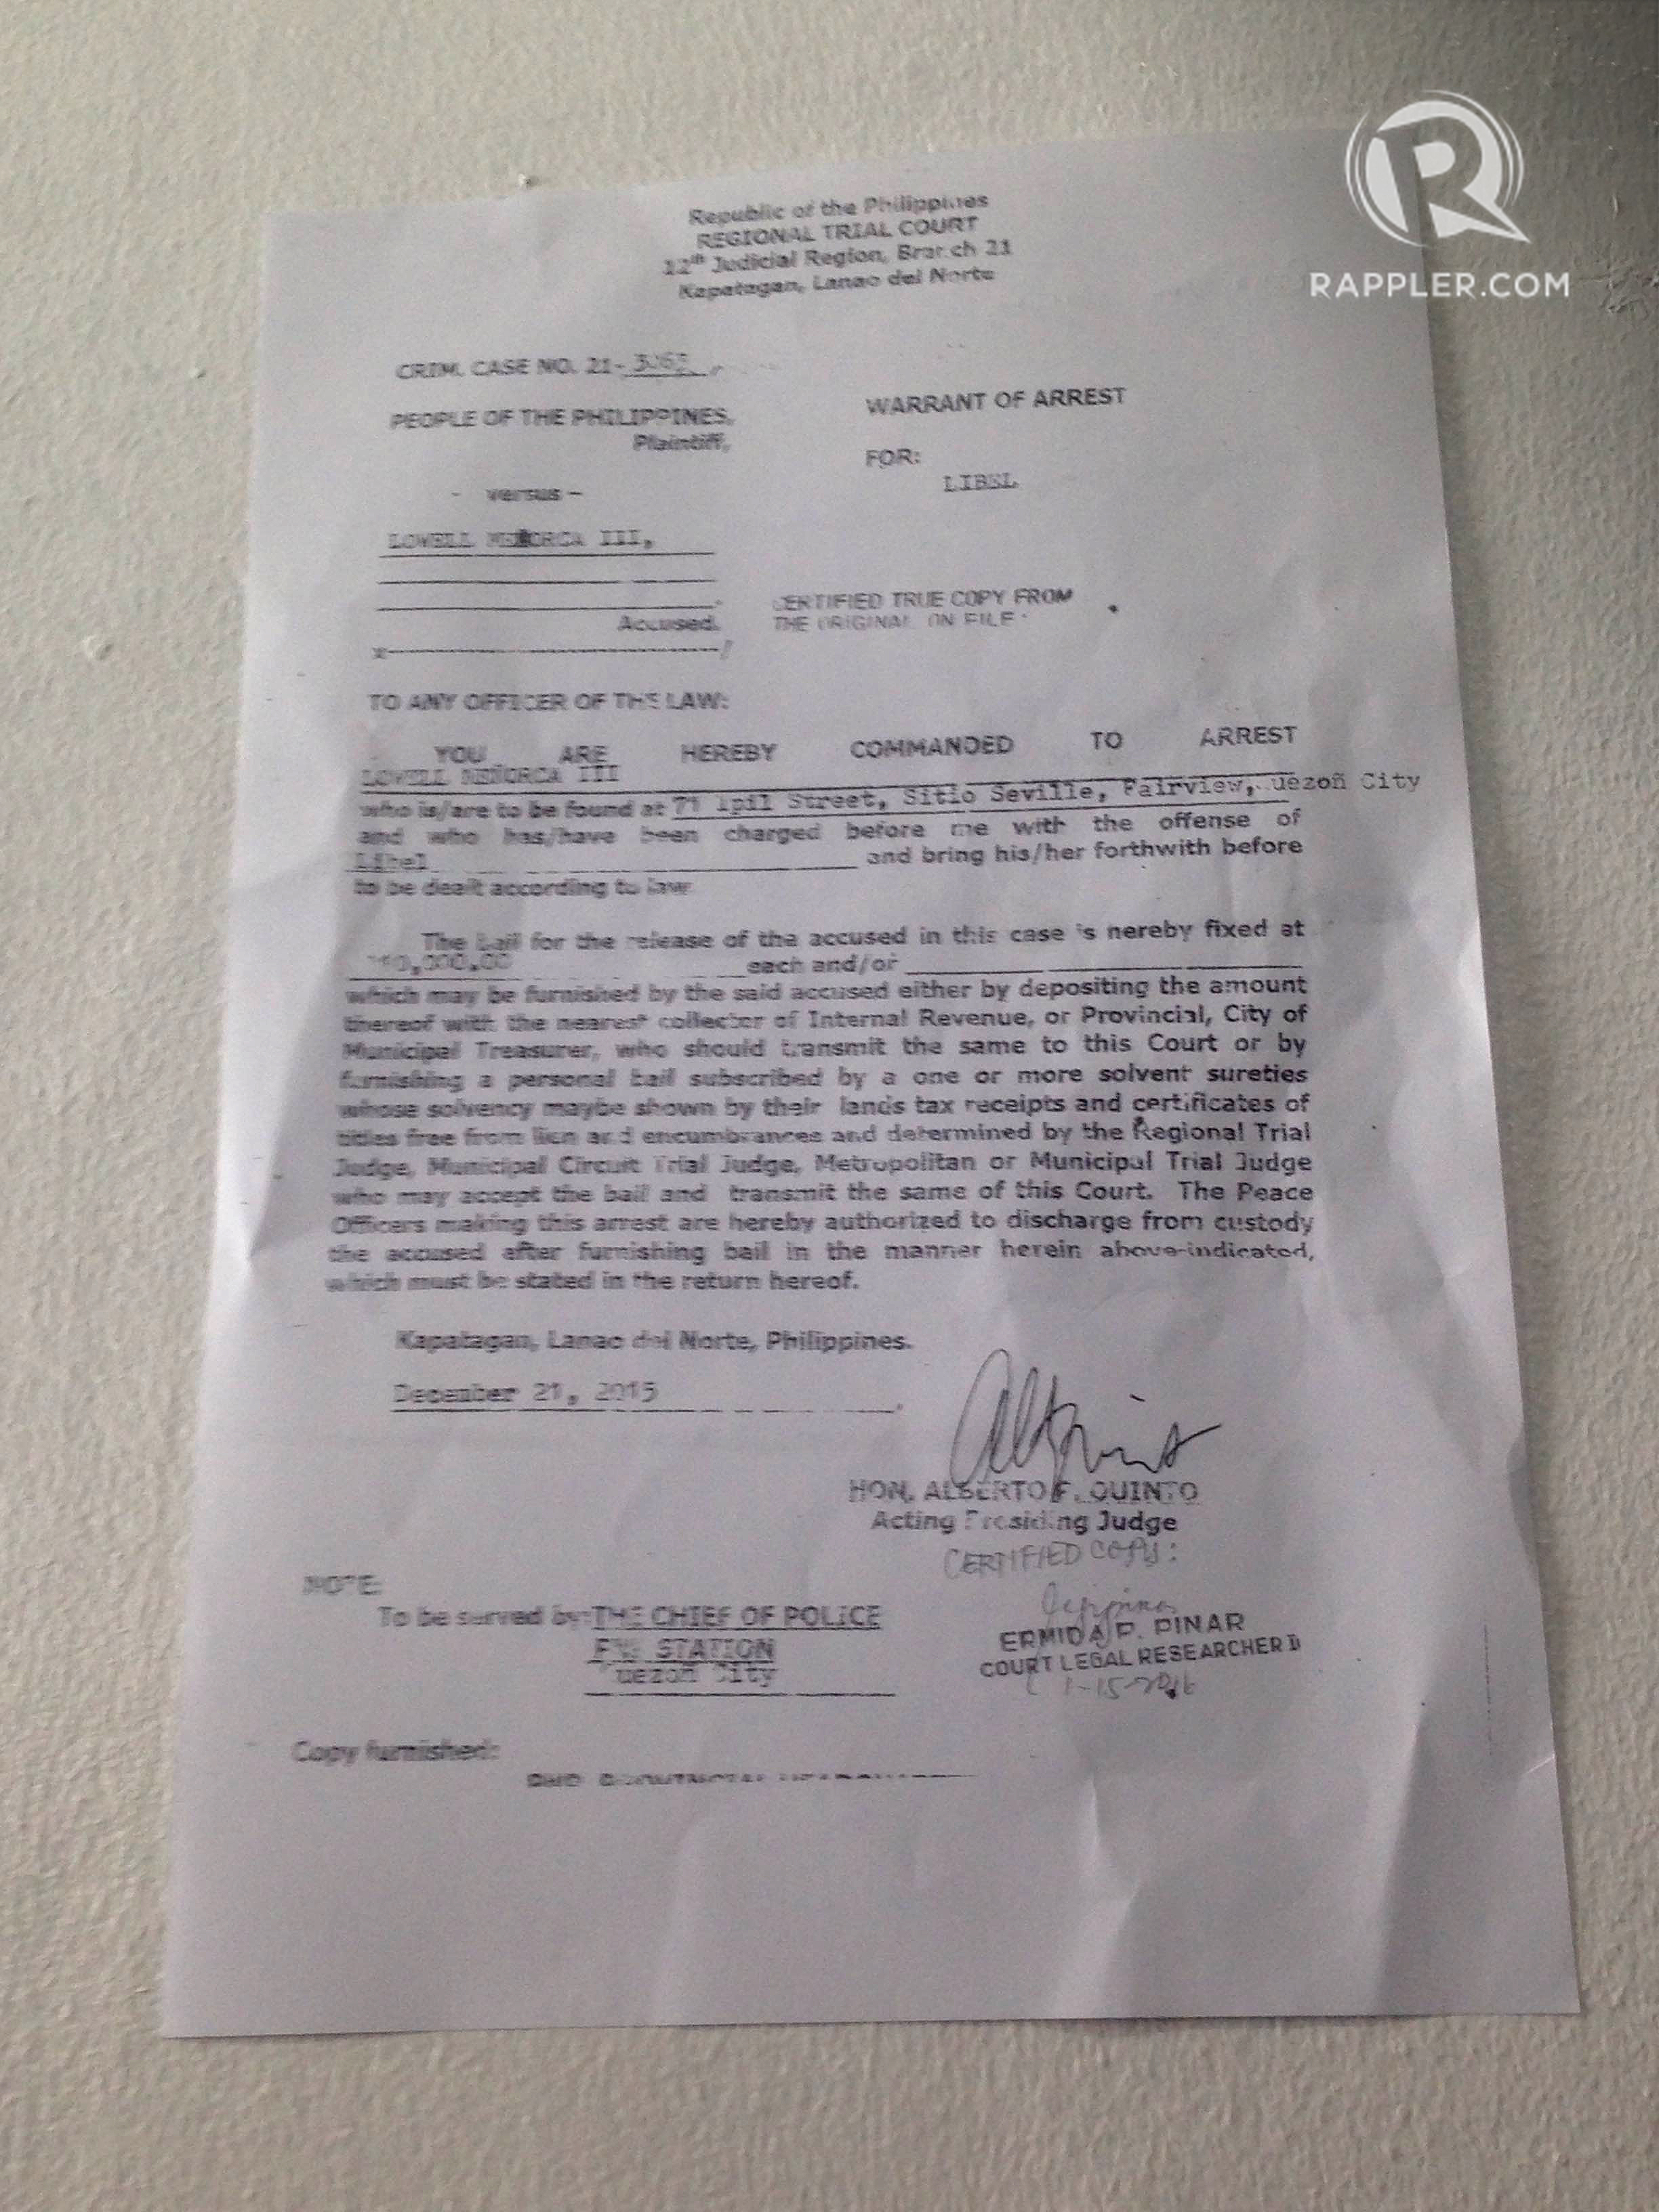 WARRANT OF ARREST. The warrant of arrest, dated December 21, 2015, issued by the Regional Trial Court in Kapatagan, Lanao del Norte. Photo by Katerina Francisco/Rappler 